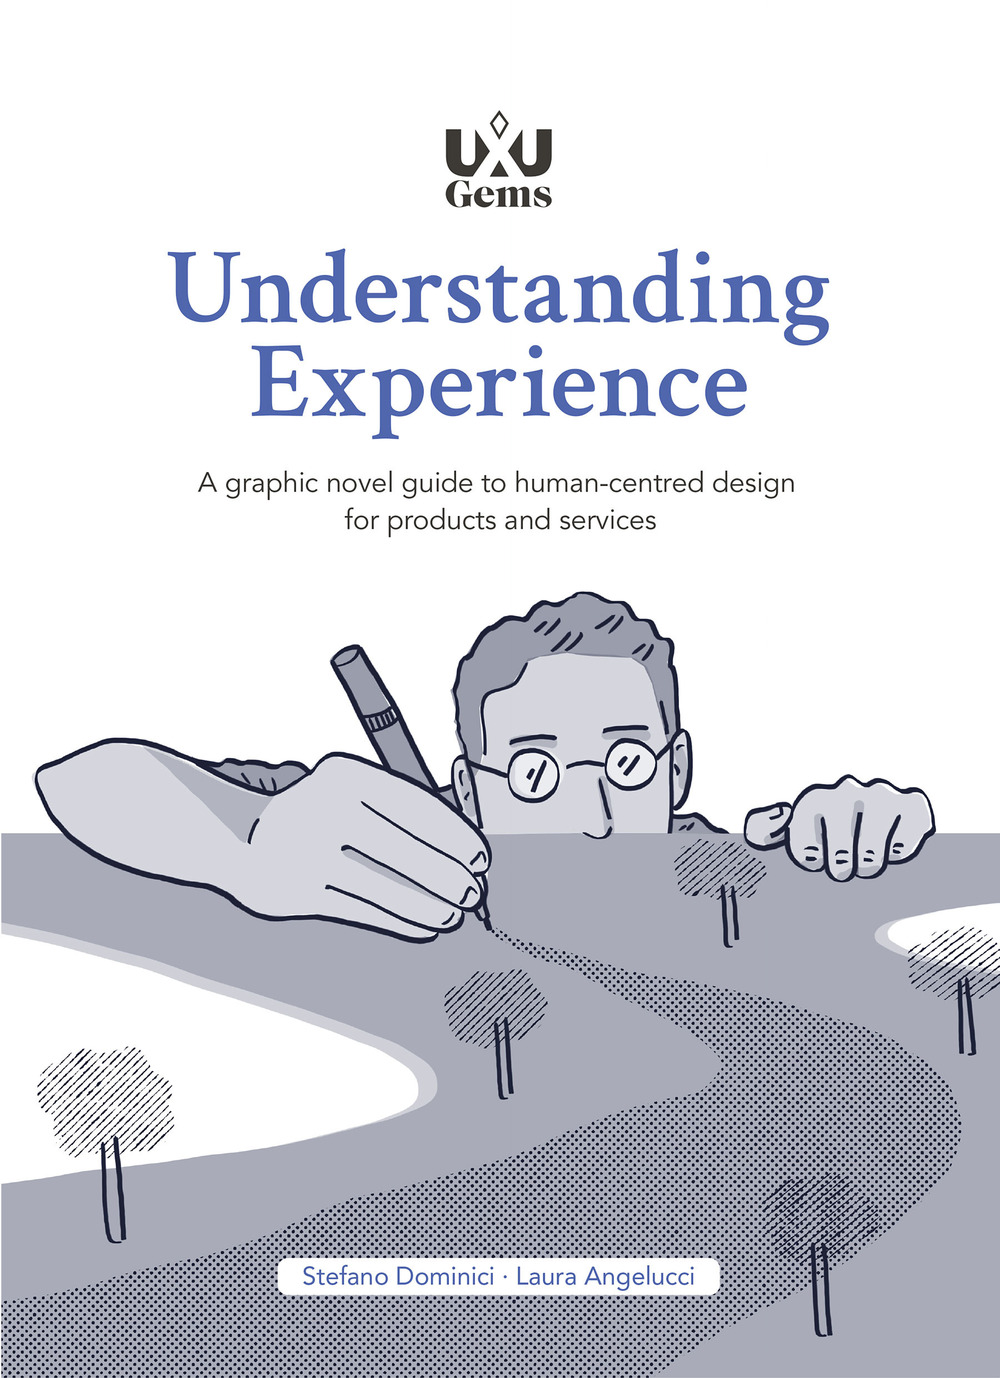 Understanding Experience. A graphic novel guide to human-centred design for products and services